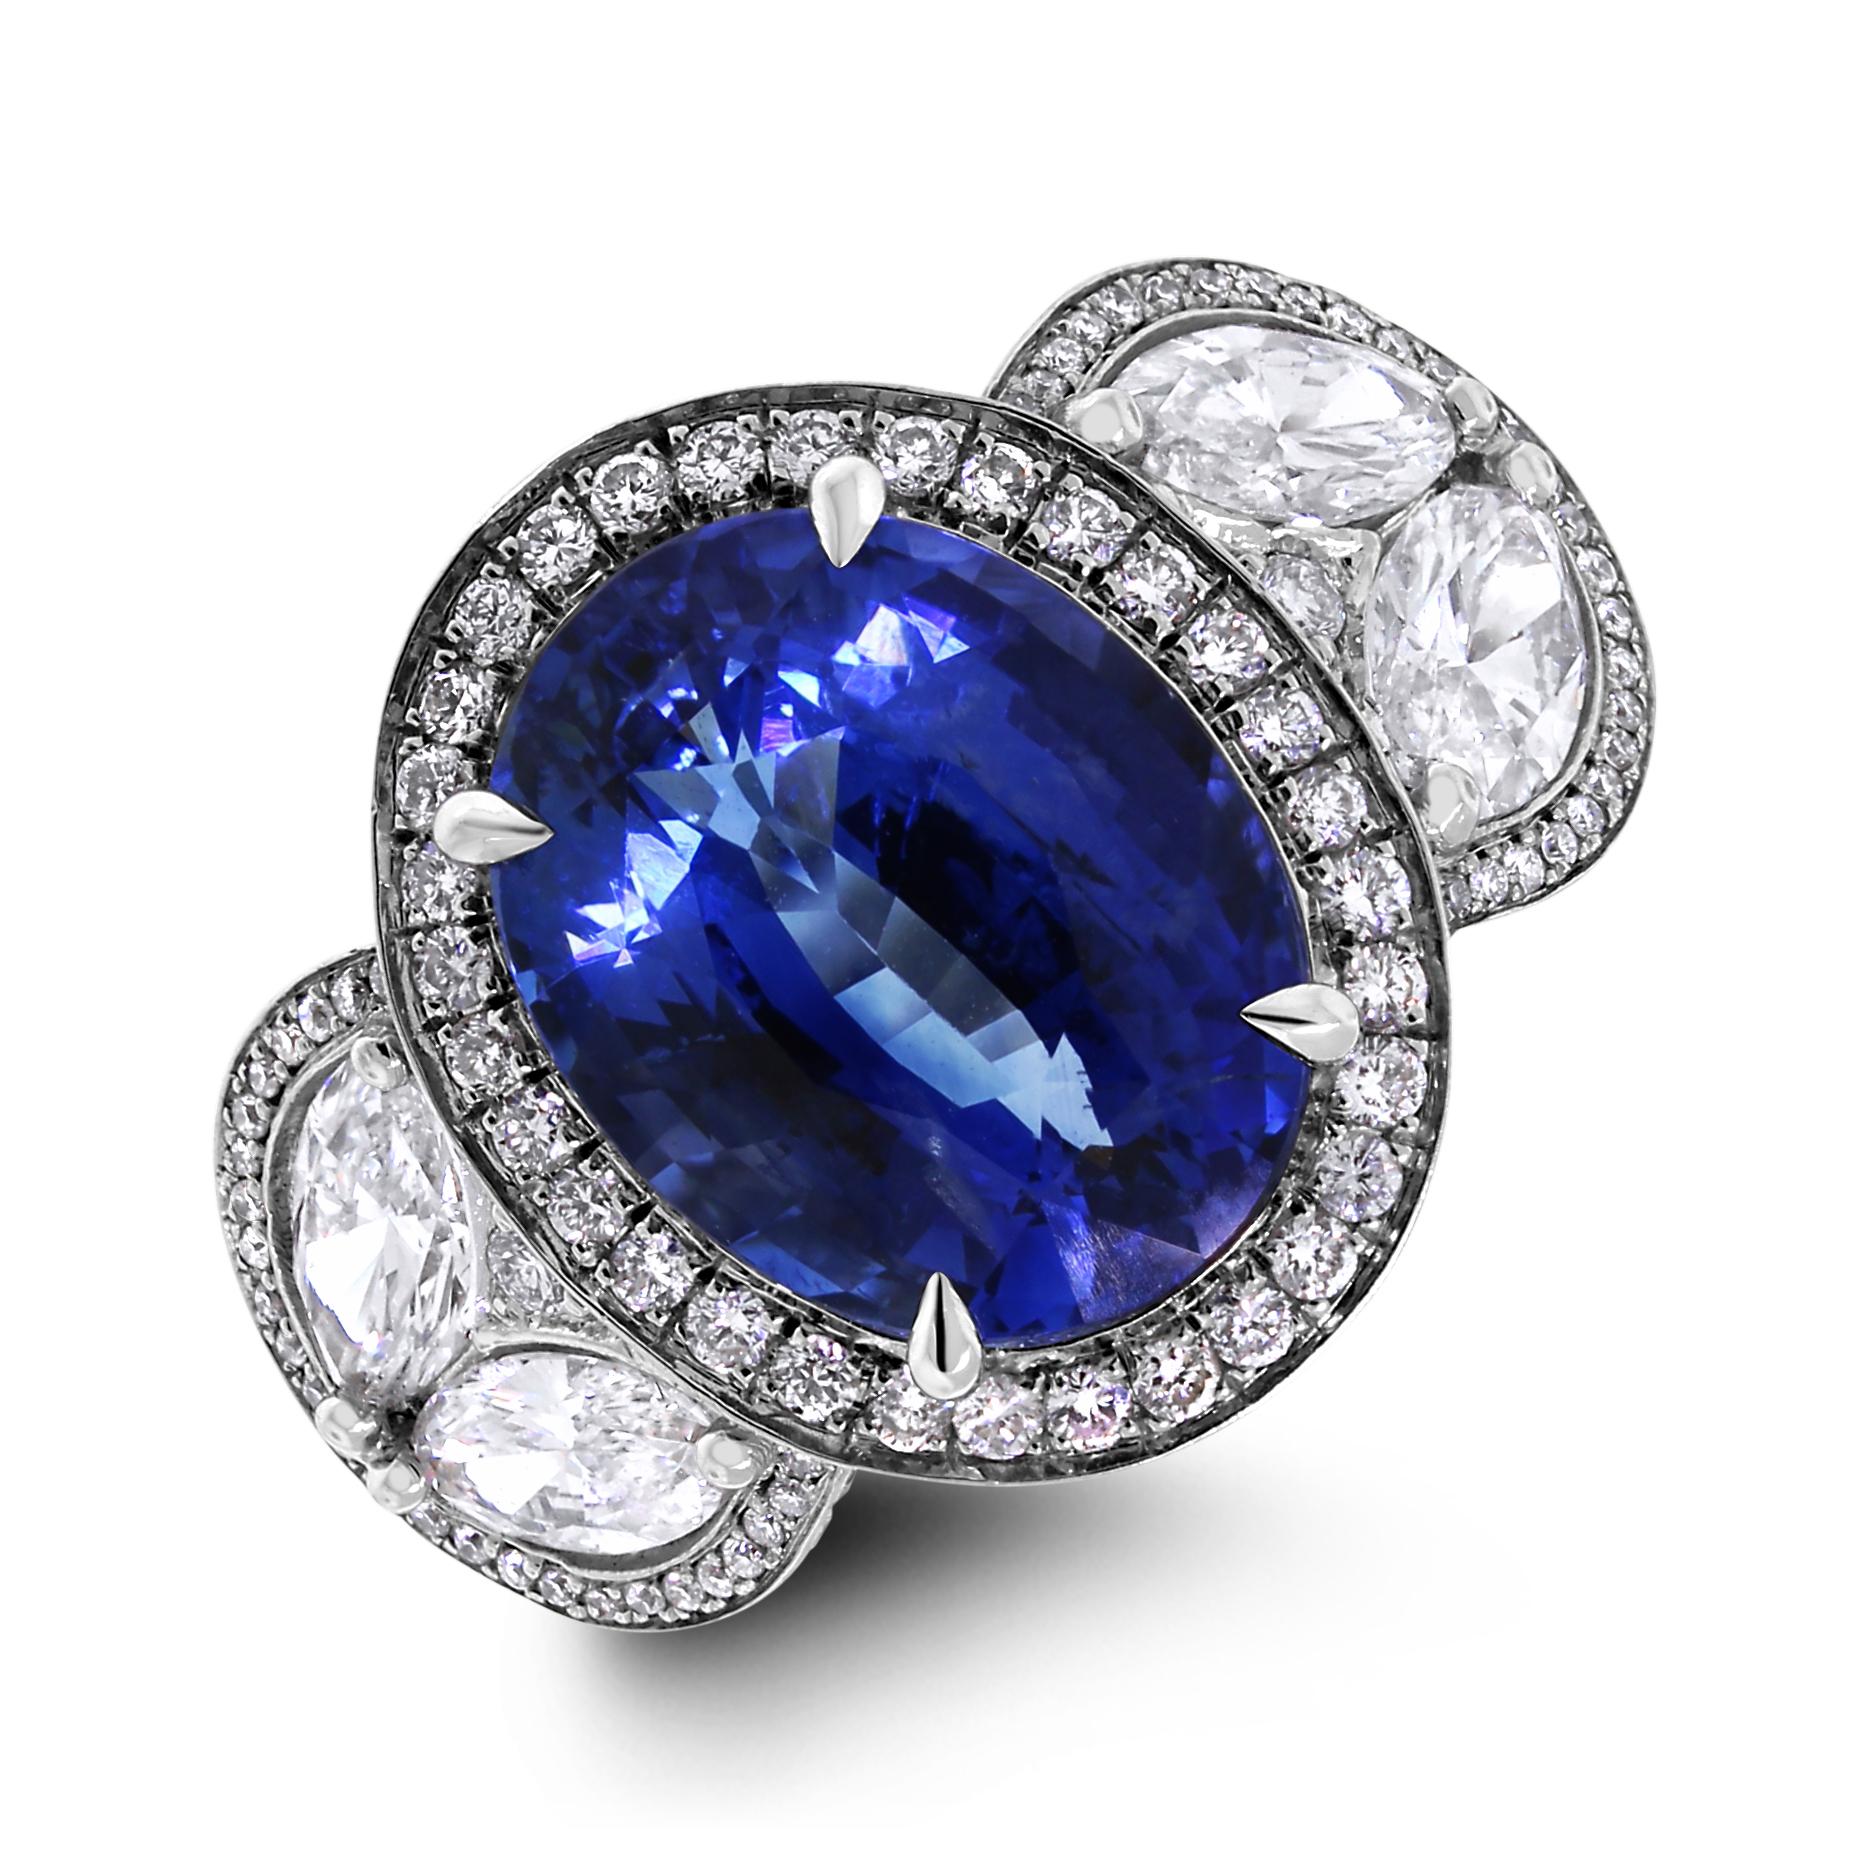 An enviable jewel, this ring sports some dazzling Diamonds & a sparkling Sapphire. 

Gemstones Type: Sapphire 
Gemstones Shape: Oval 
Gemstones Weight: 5.38 ct 
Gemstones Color: Blue  

Diamonds Shape: Round & Marquise 
Side Diamonds Weight: 2.13 ct